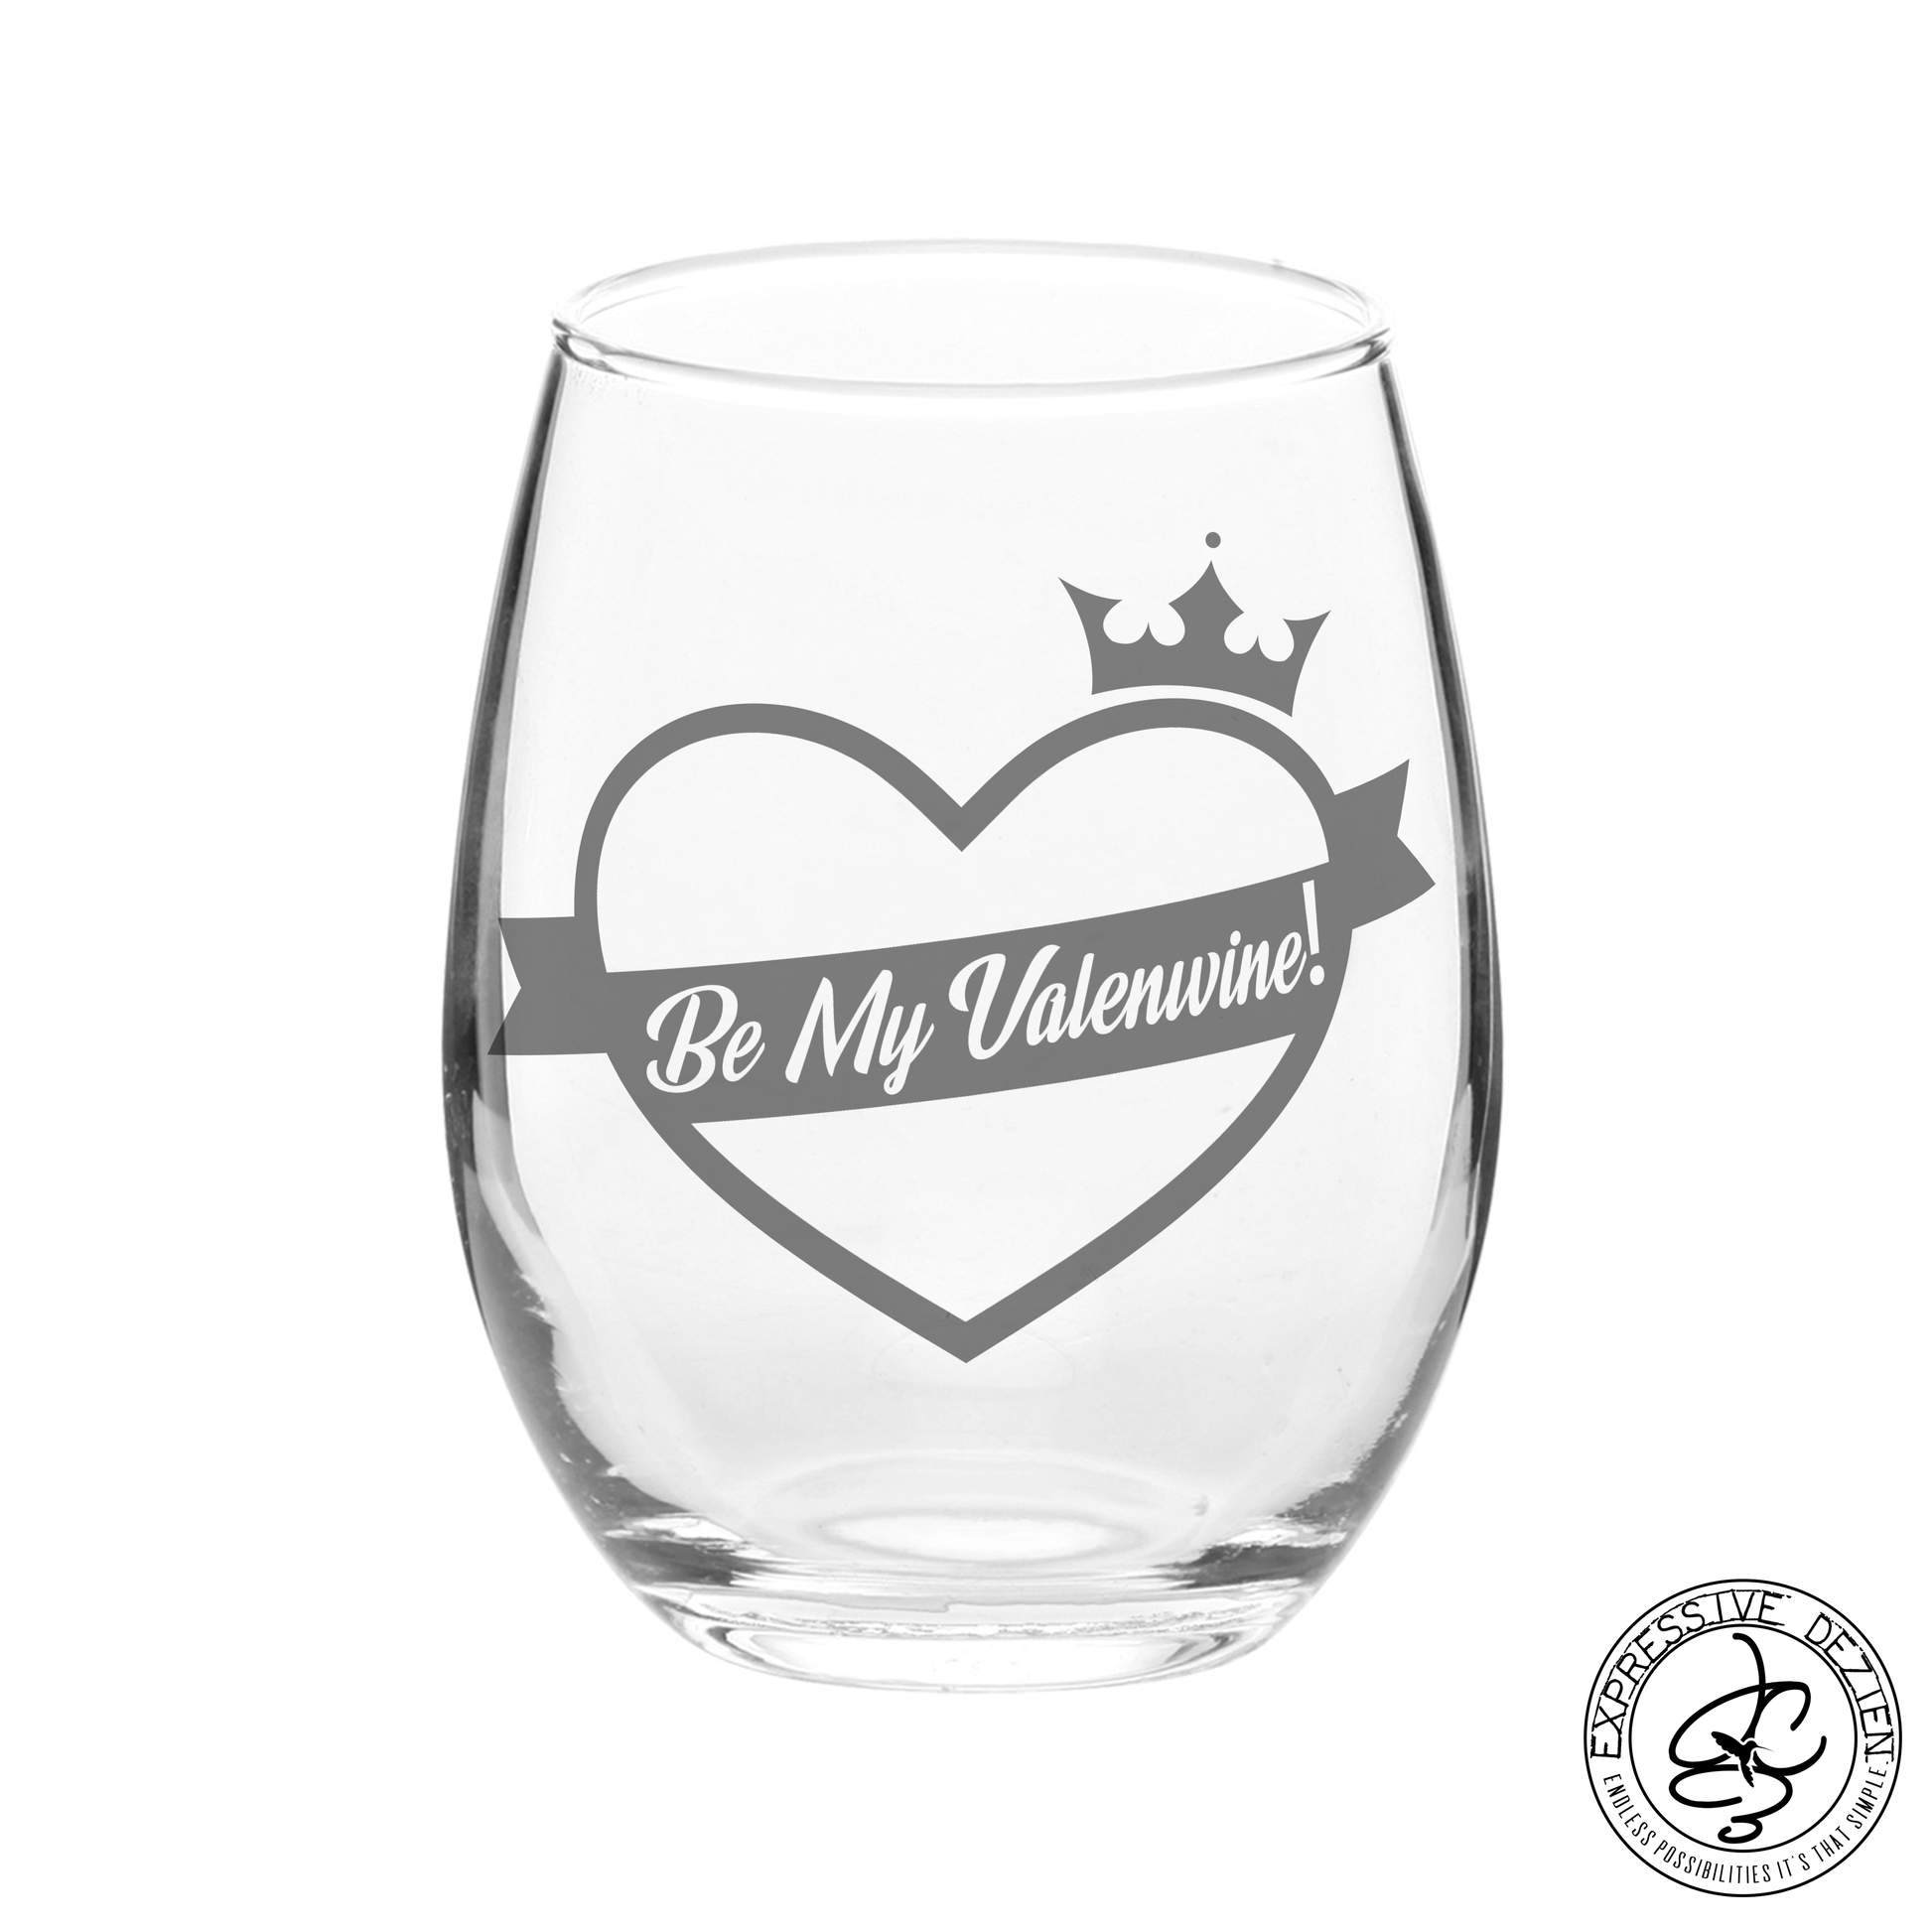 Etched Stemless Wine Glass Be my Valenwine 20.5oz Sweetheart Valentine’s Day Gift - Expressive DeZien 